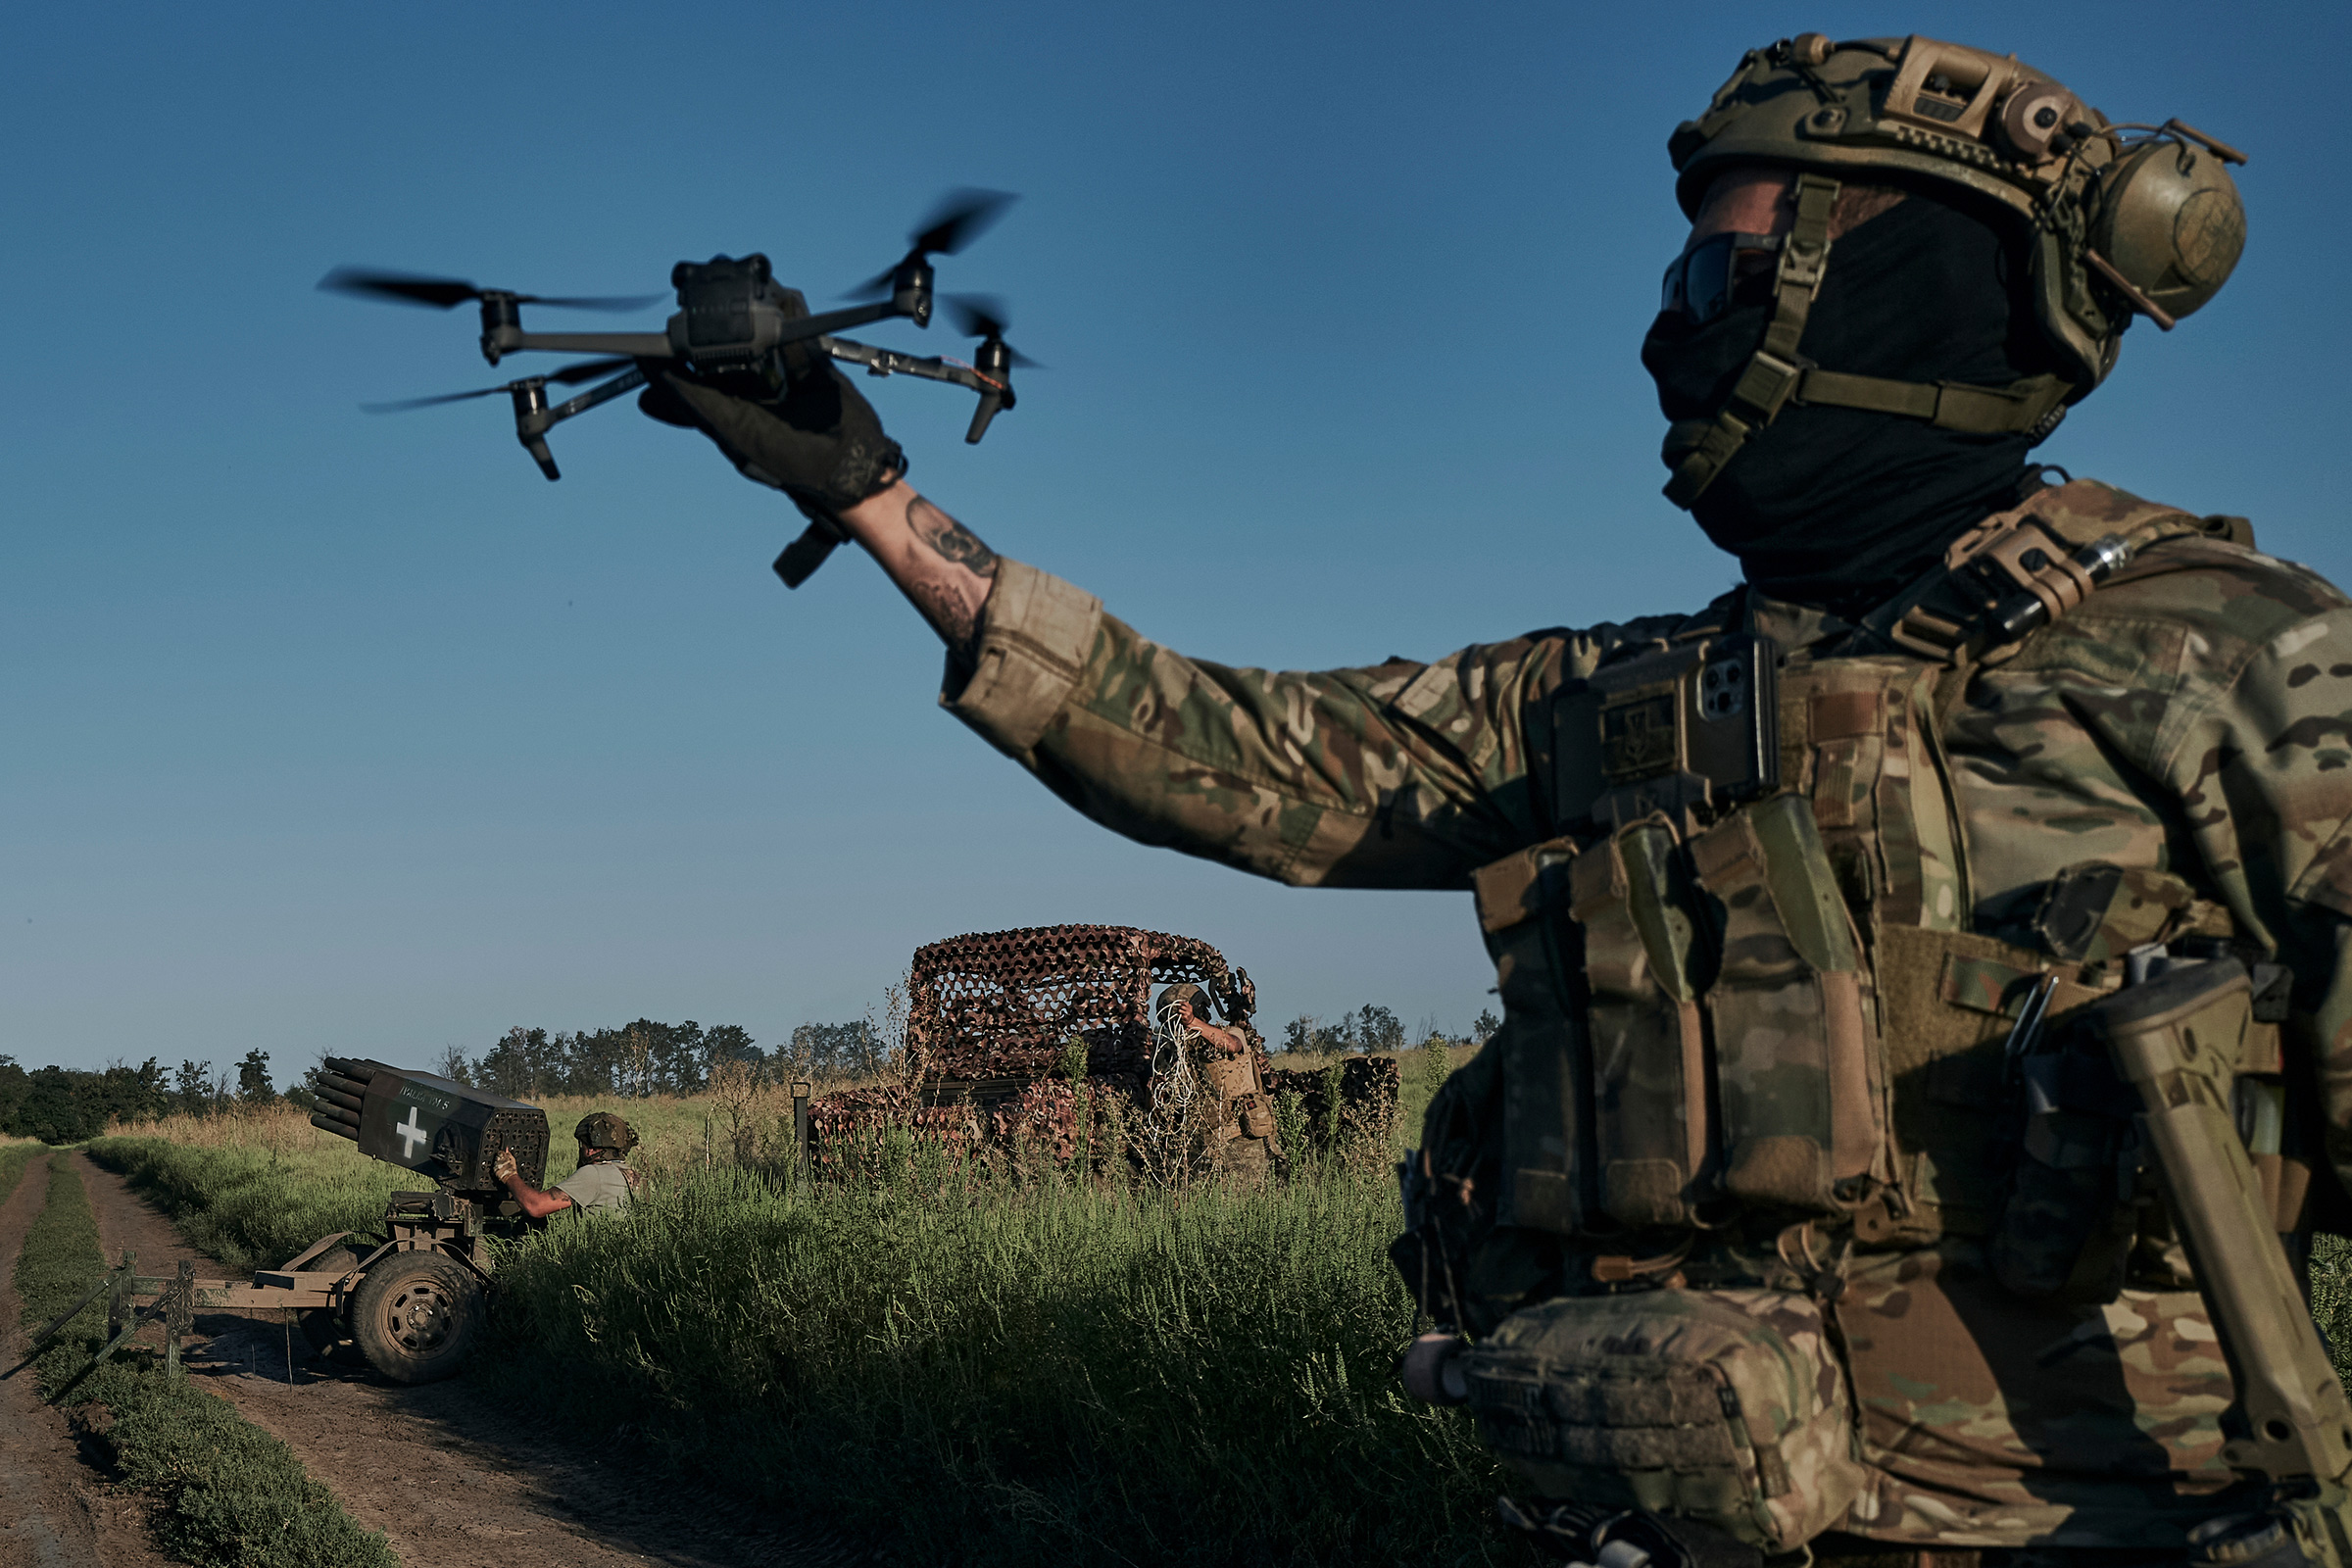 A Ukrainian soldier launches a drone at the frontline close to Bakhmut, Ukraine, Sunday, Aug. 20, 2023. (尝颈产办辞蝉—础笔)